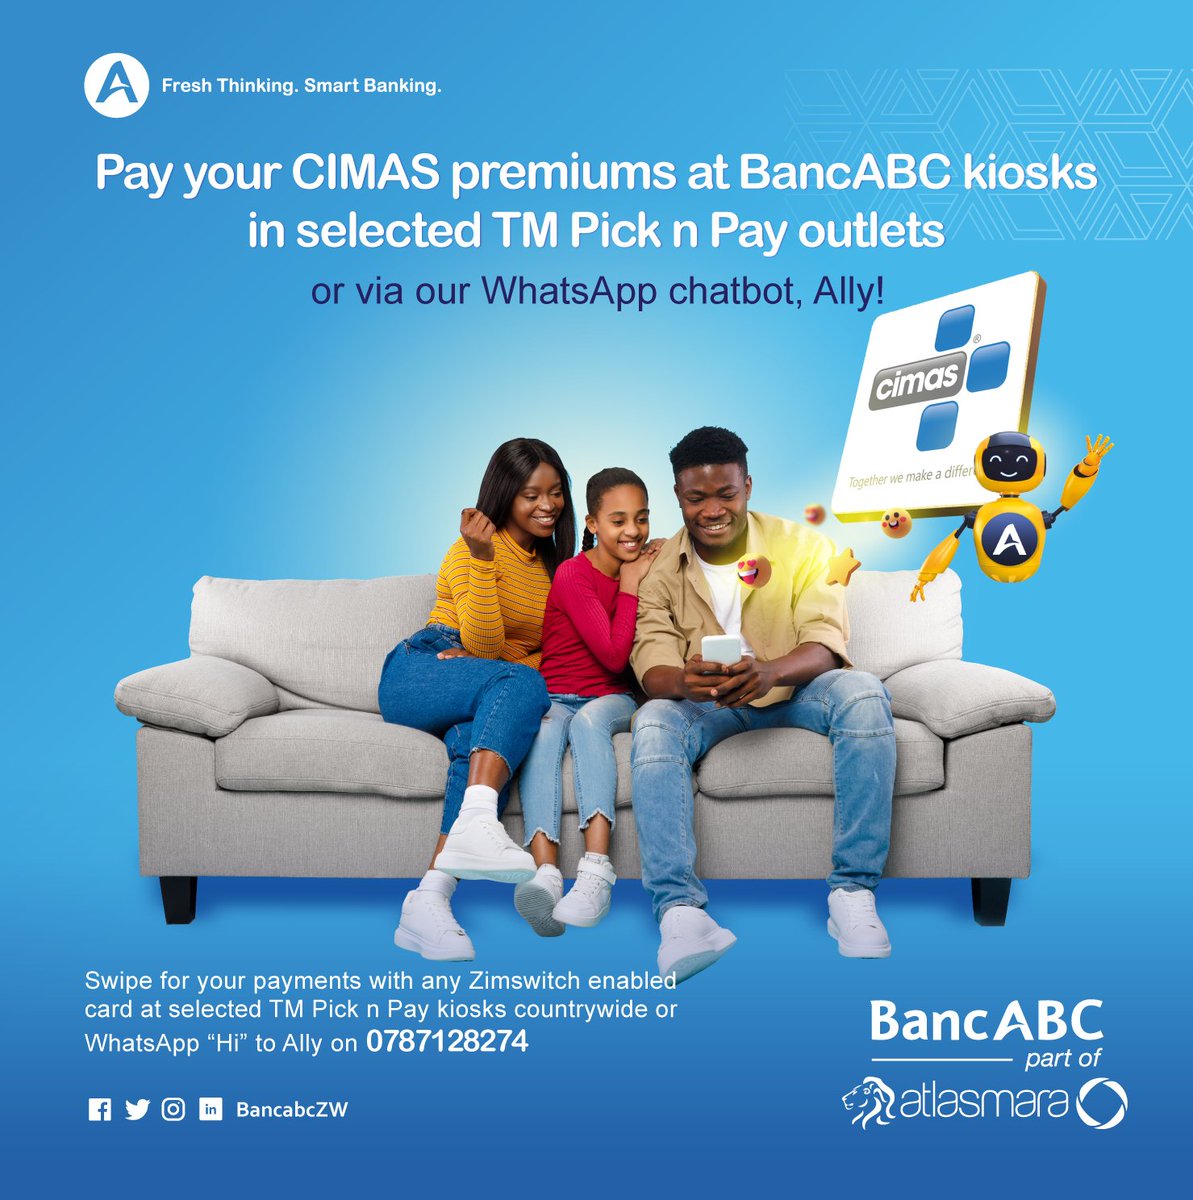 Never compromise when it comes to your healthcare.⚕️ Did you know? You can pay for your CIMAS premiums at BancABC kiosks in selected Pick n Pay outlets or via Ally.🤖 So convenient! #FreshThinking #SmartBanking